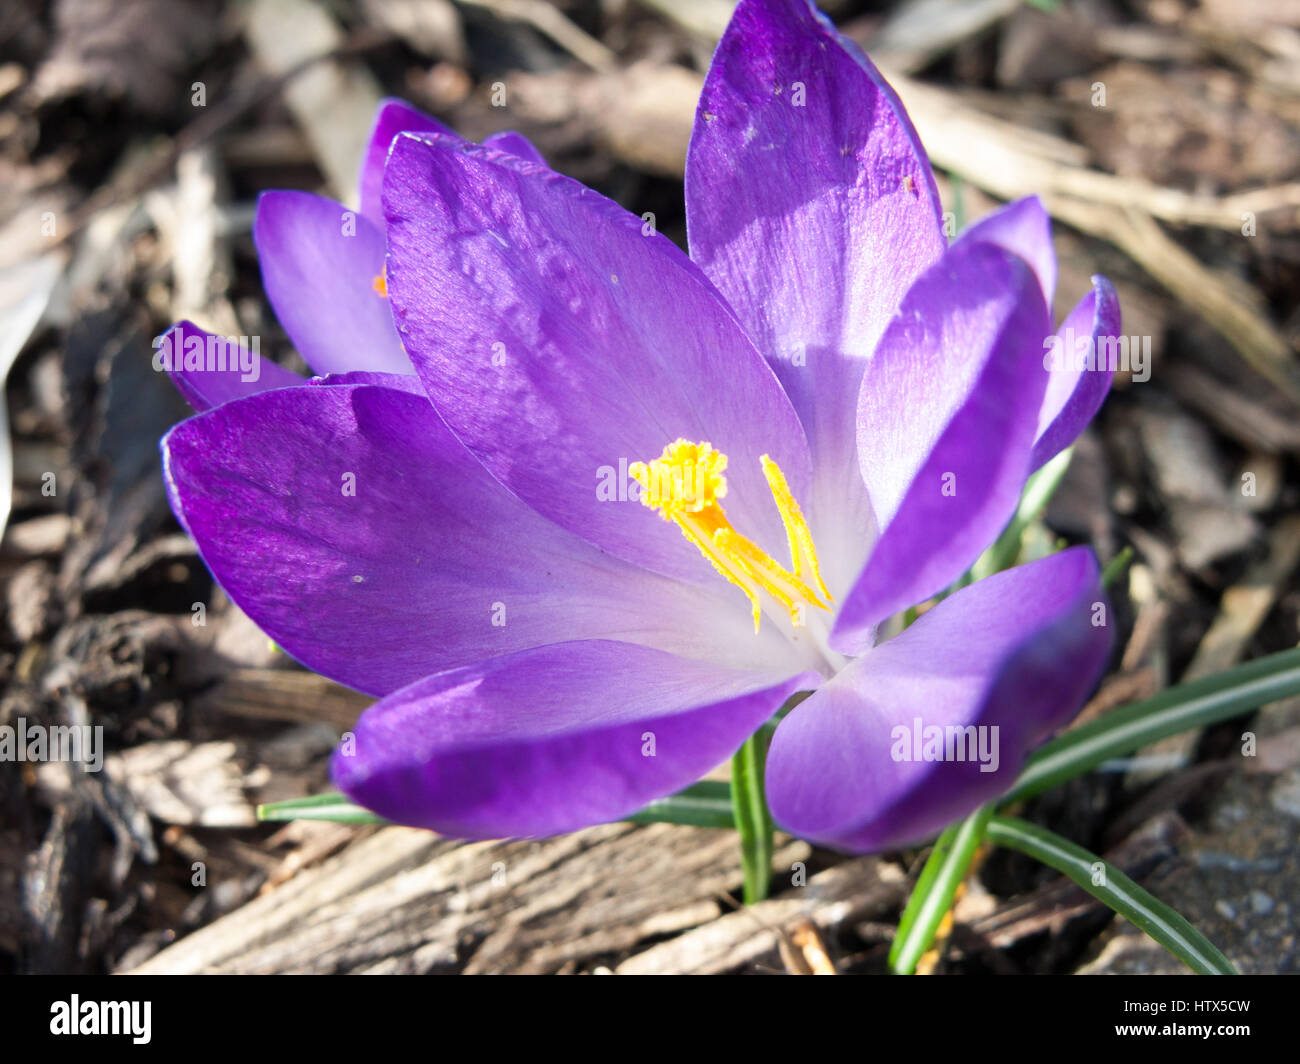 A gorgeous close-up macro of a purple flower with a yellow centre. Stock Photo